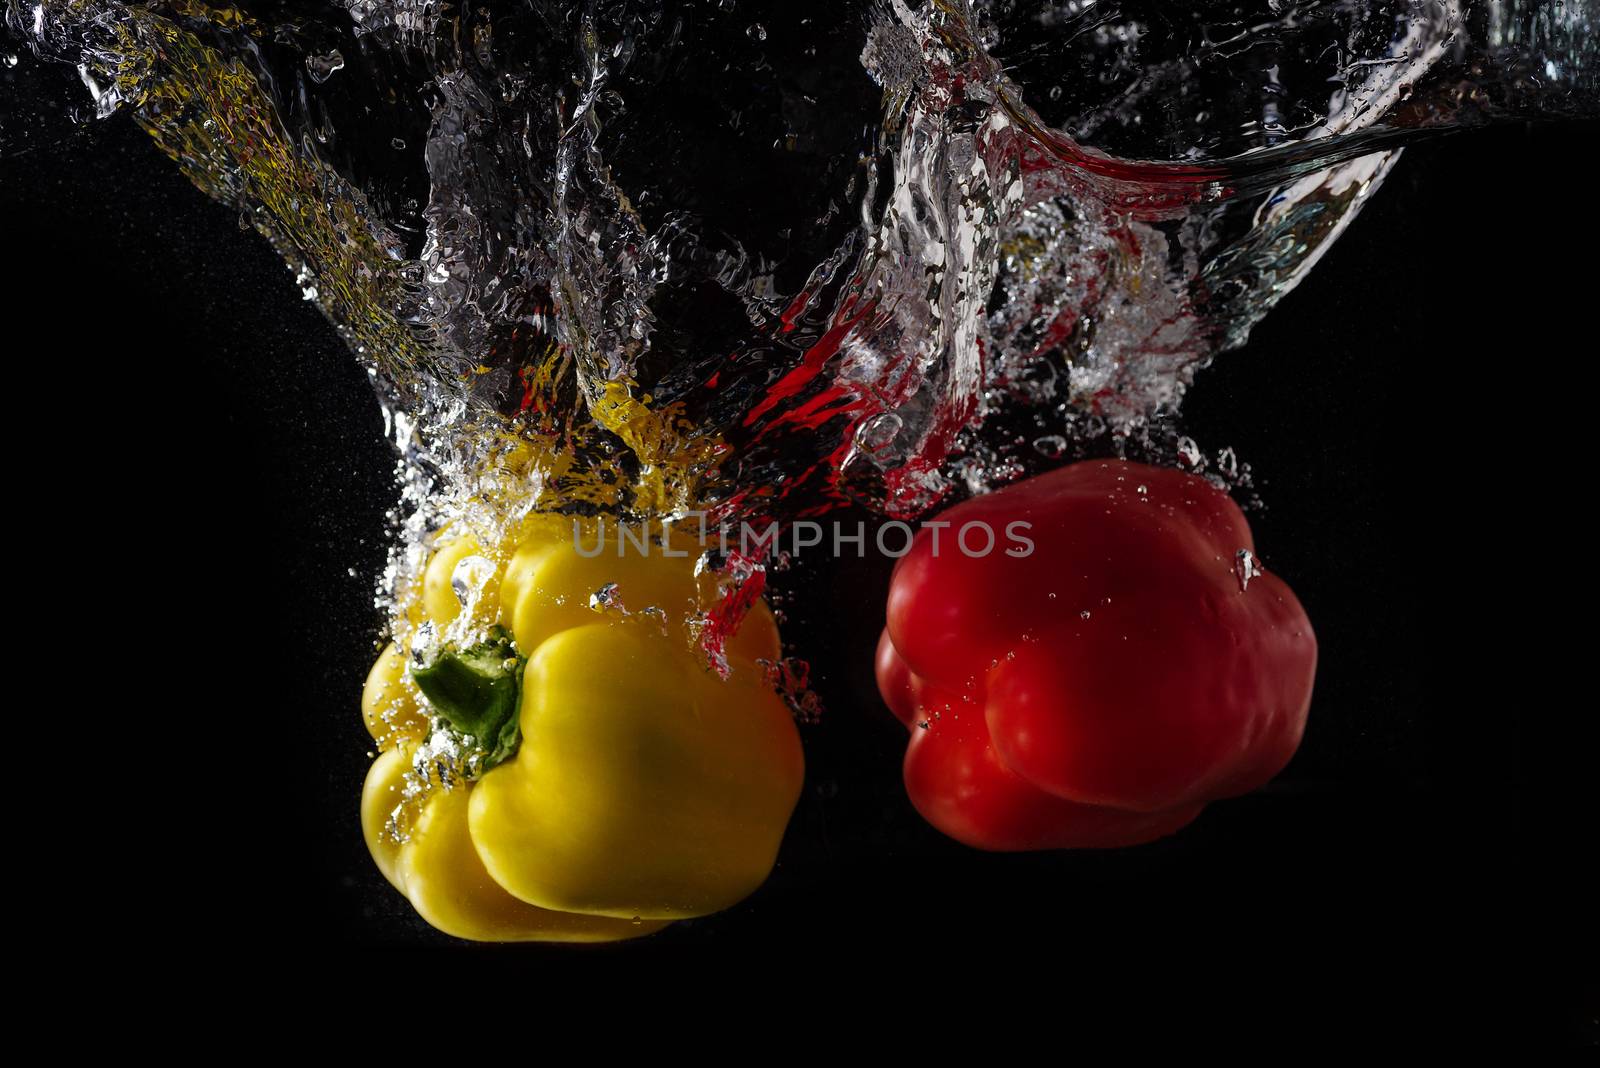 Vegetables tomato and paprika in water splash on black background